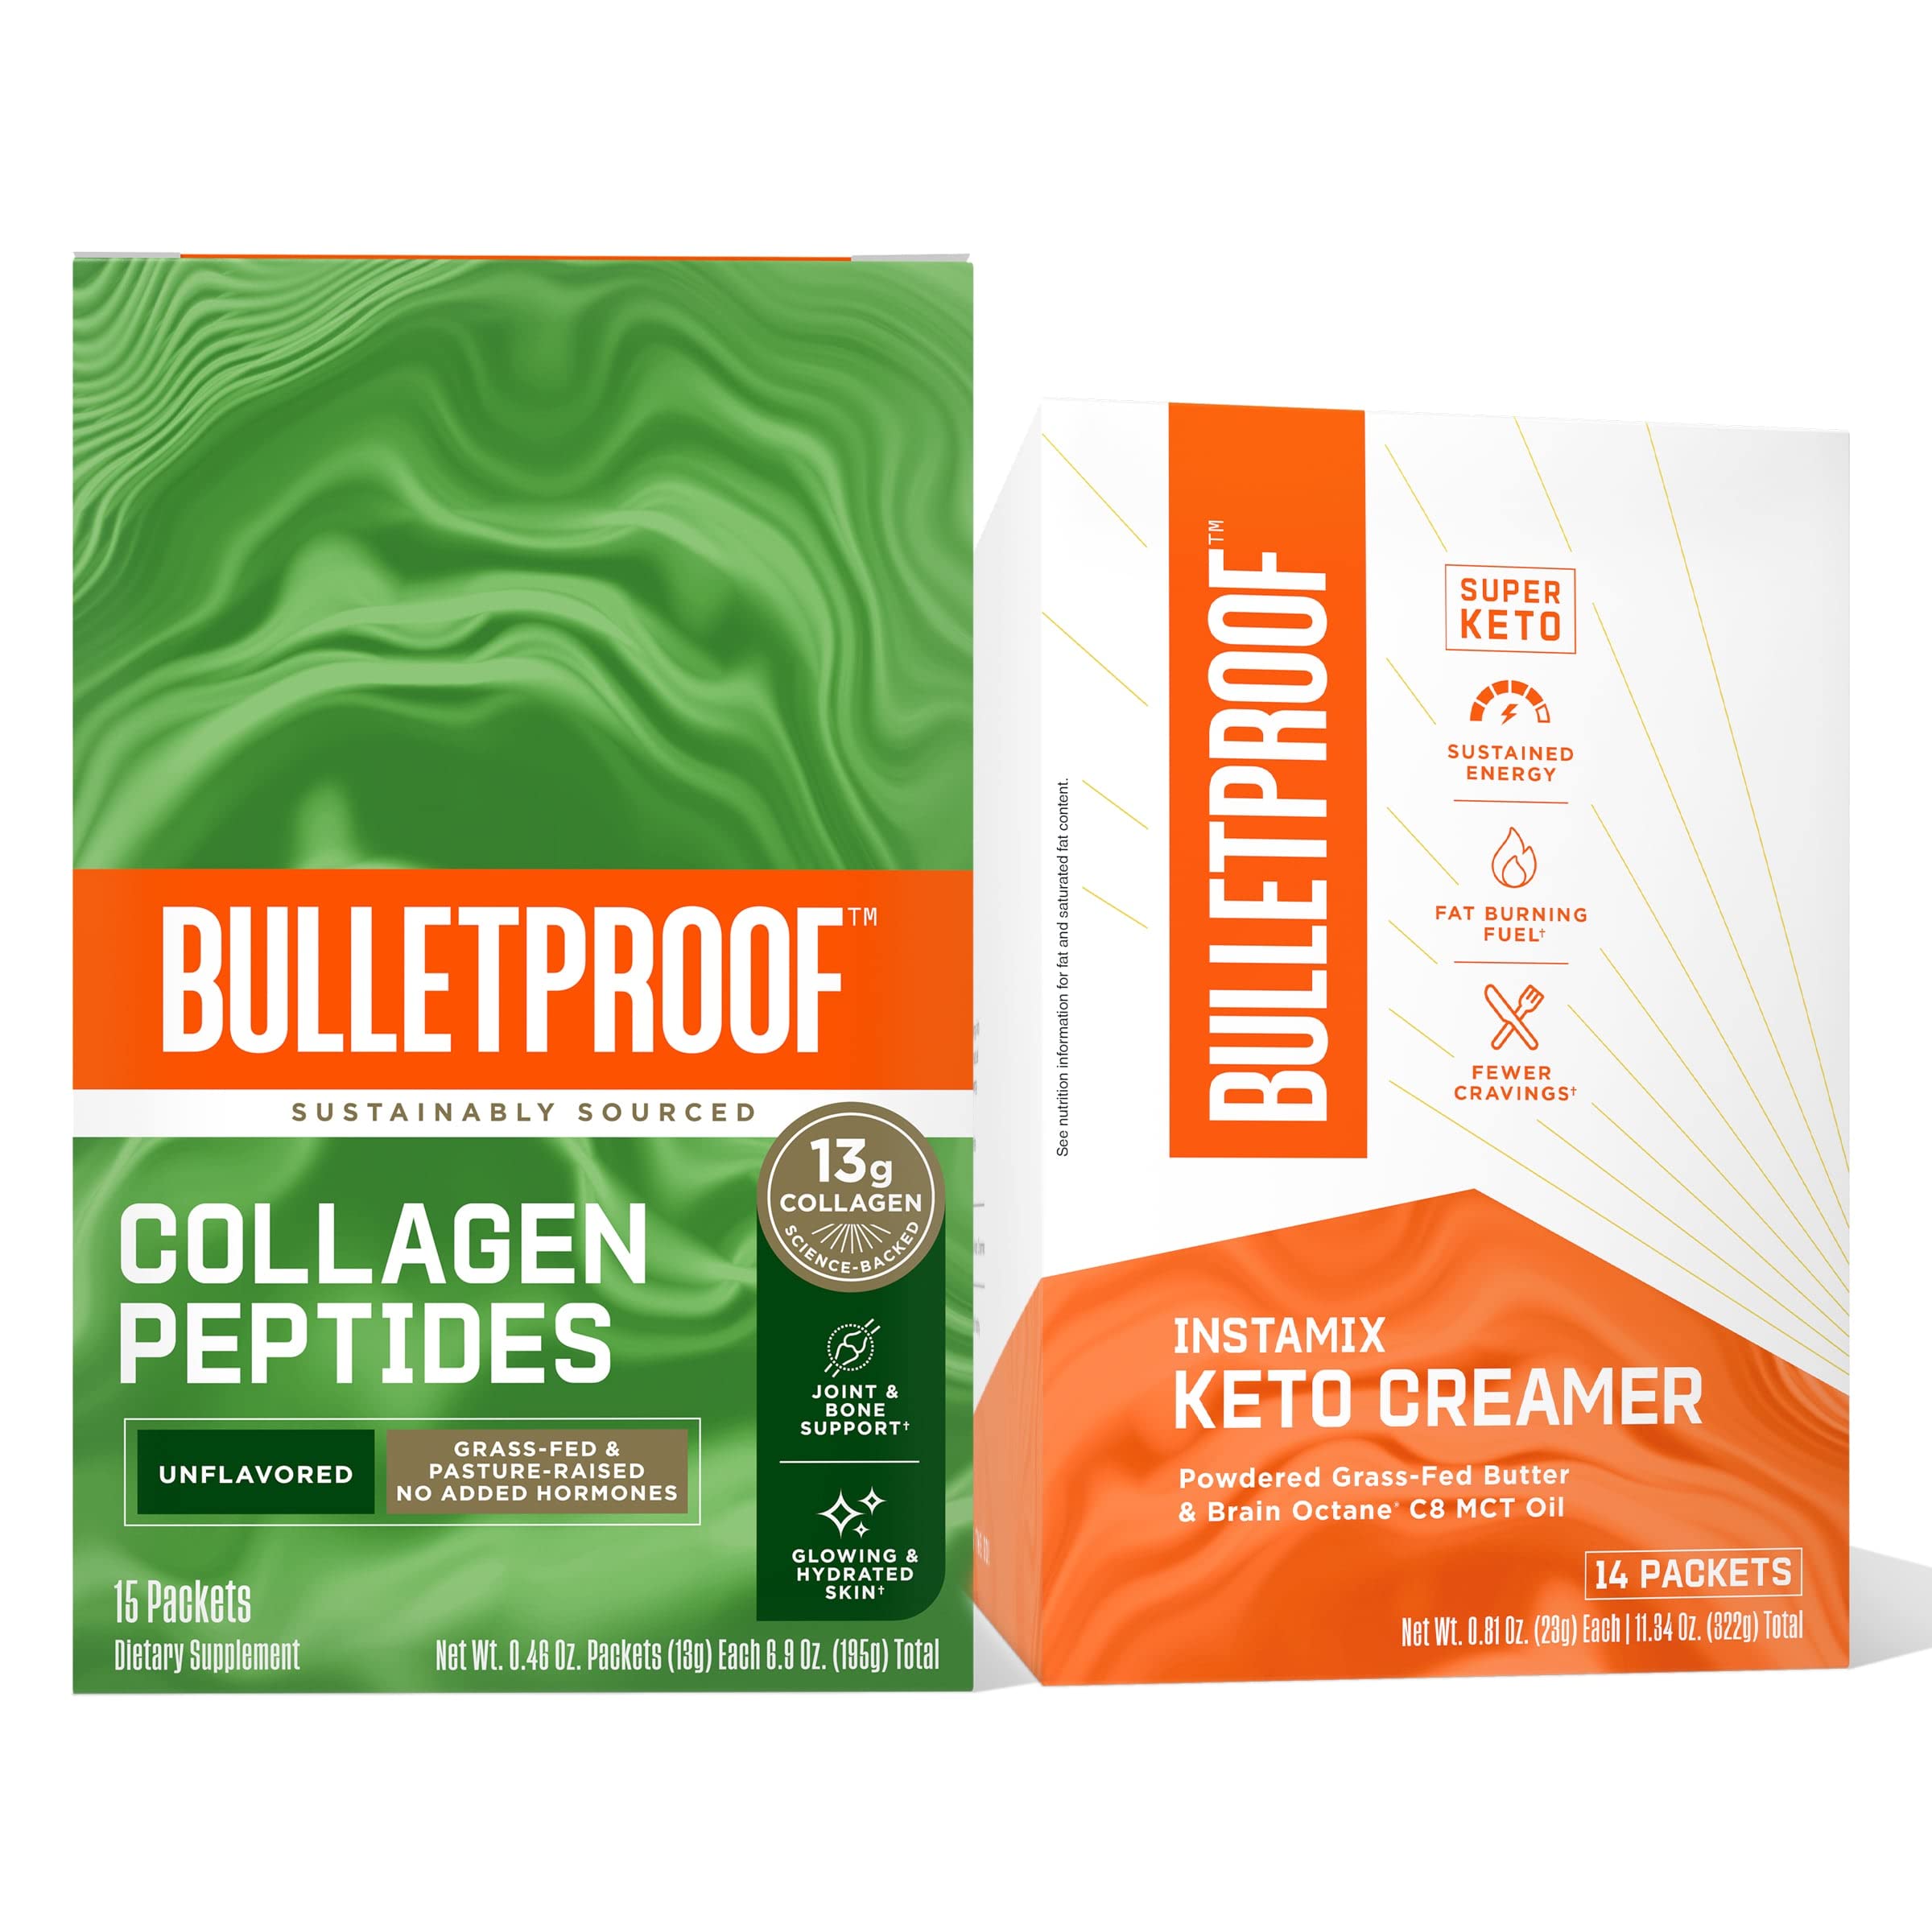 Bulletproof Coffee Duo - InstaMix Keto Coffee Creamer with Grass-Fed Ghee and MCT oil, 14 Pack & Unflavored Collagen Protein with 13g Grass-Fed Collagen Peptides for Skin, Bones, and Joints, 15 Pack